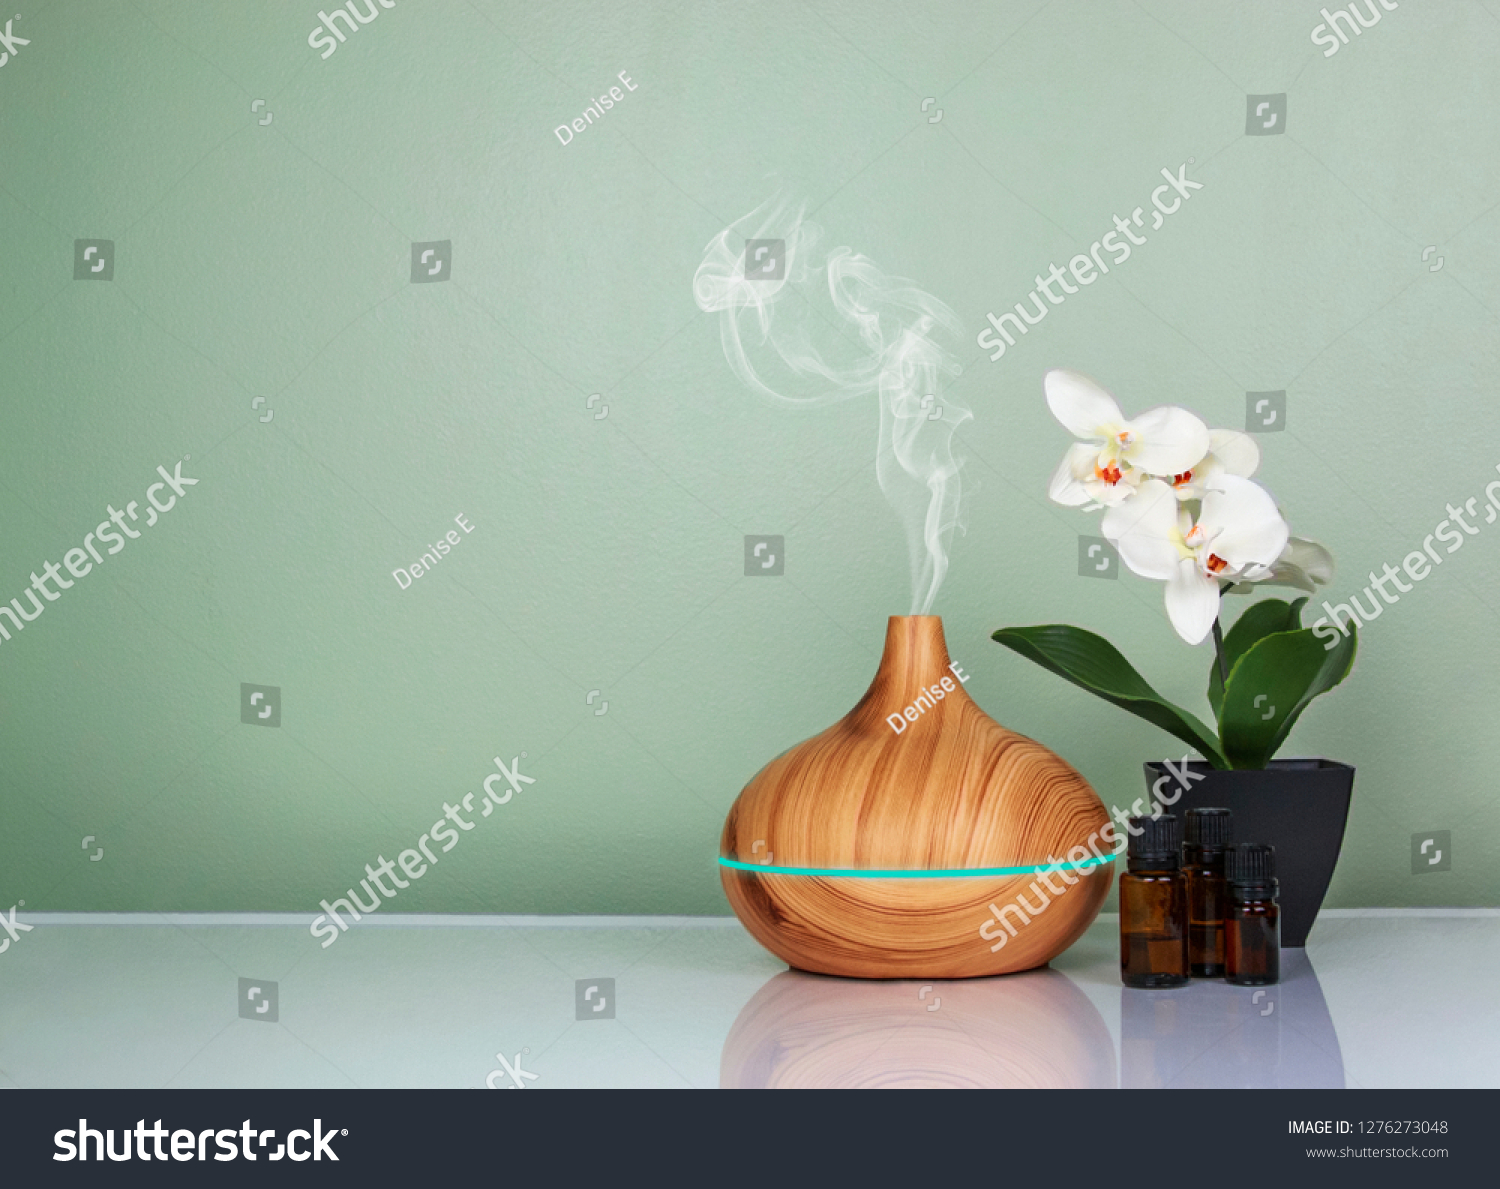 Electric Essential oils Aroma diffuser, oil bottles and flowers on light green surface with reflection. #1276273048